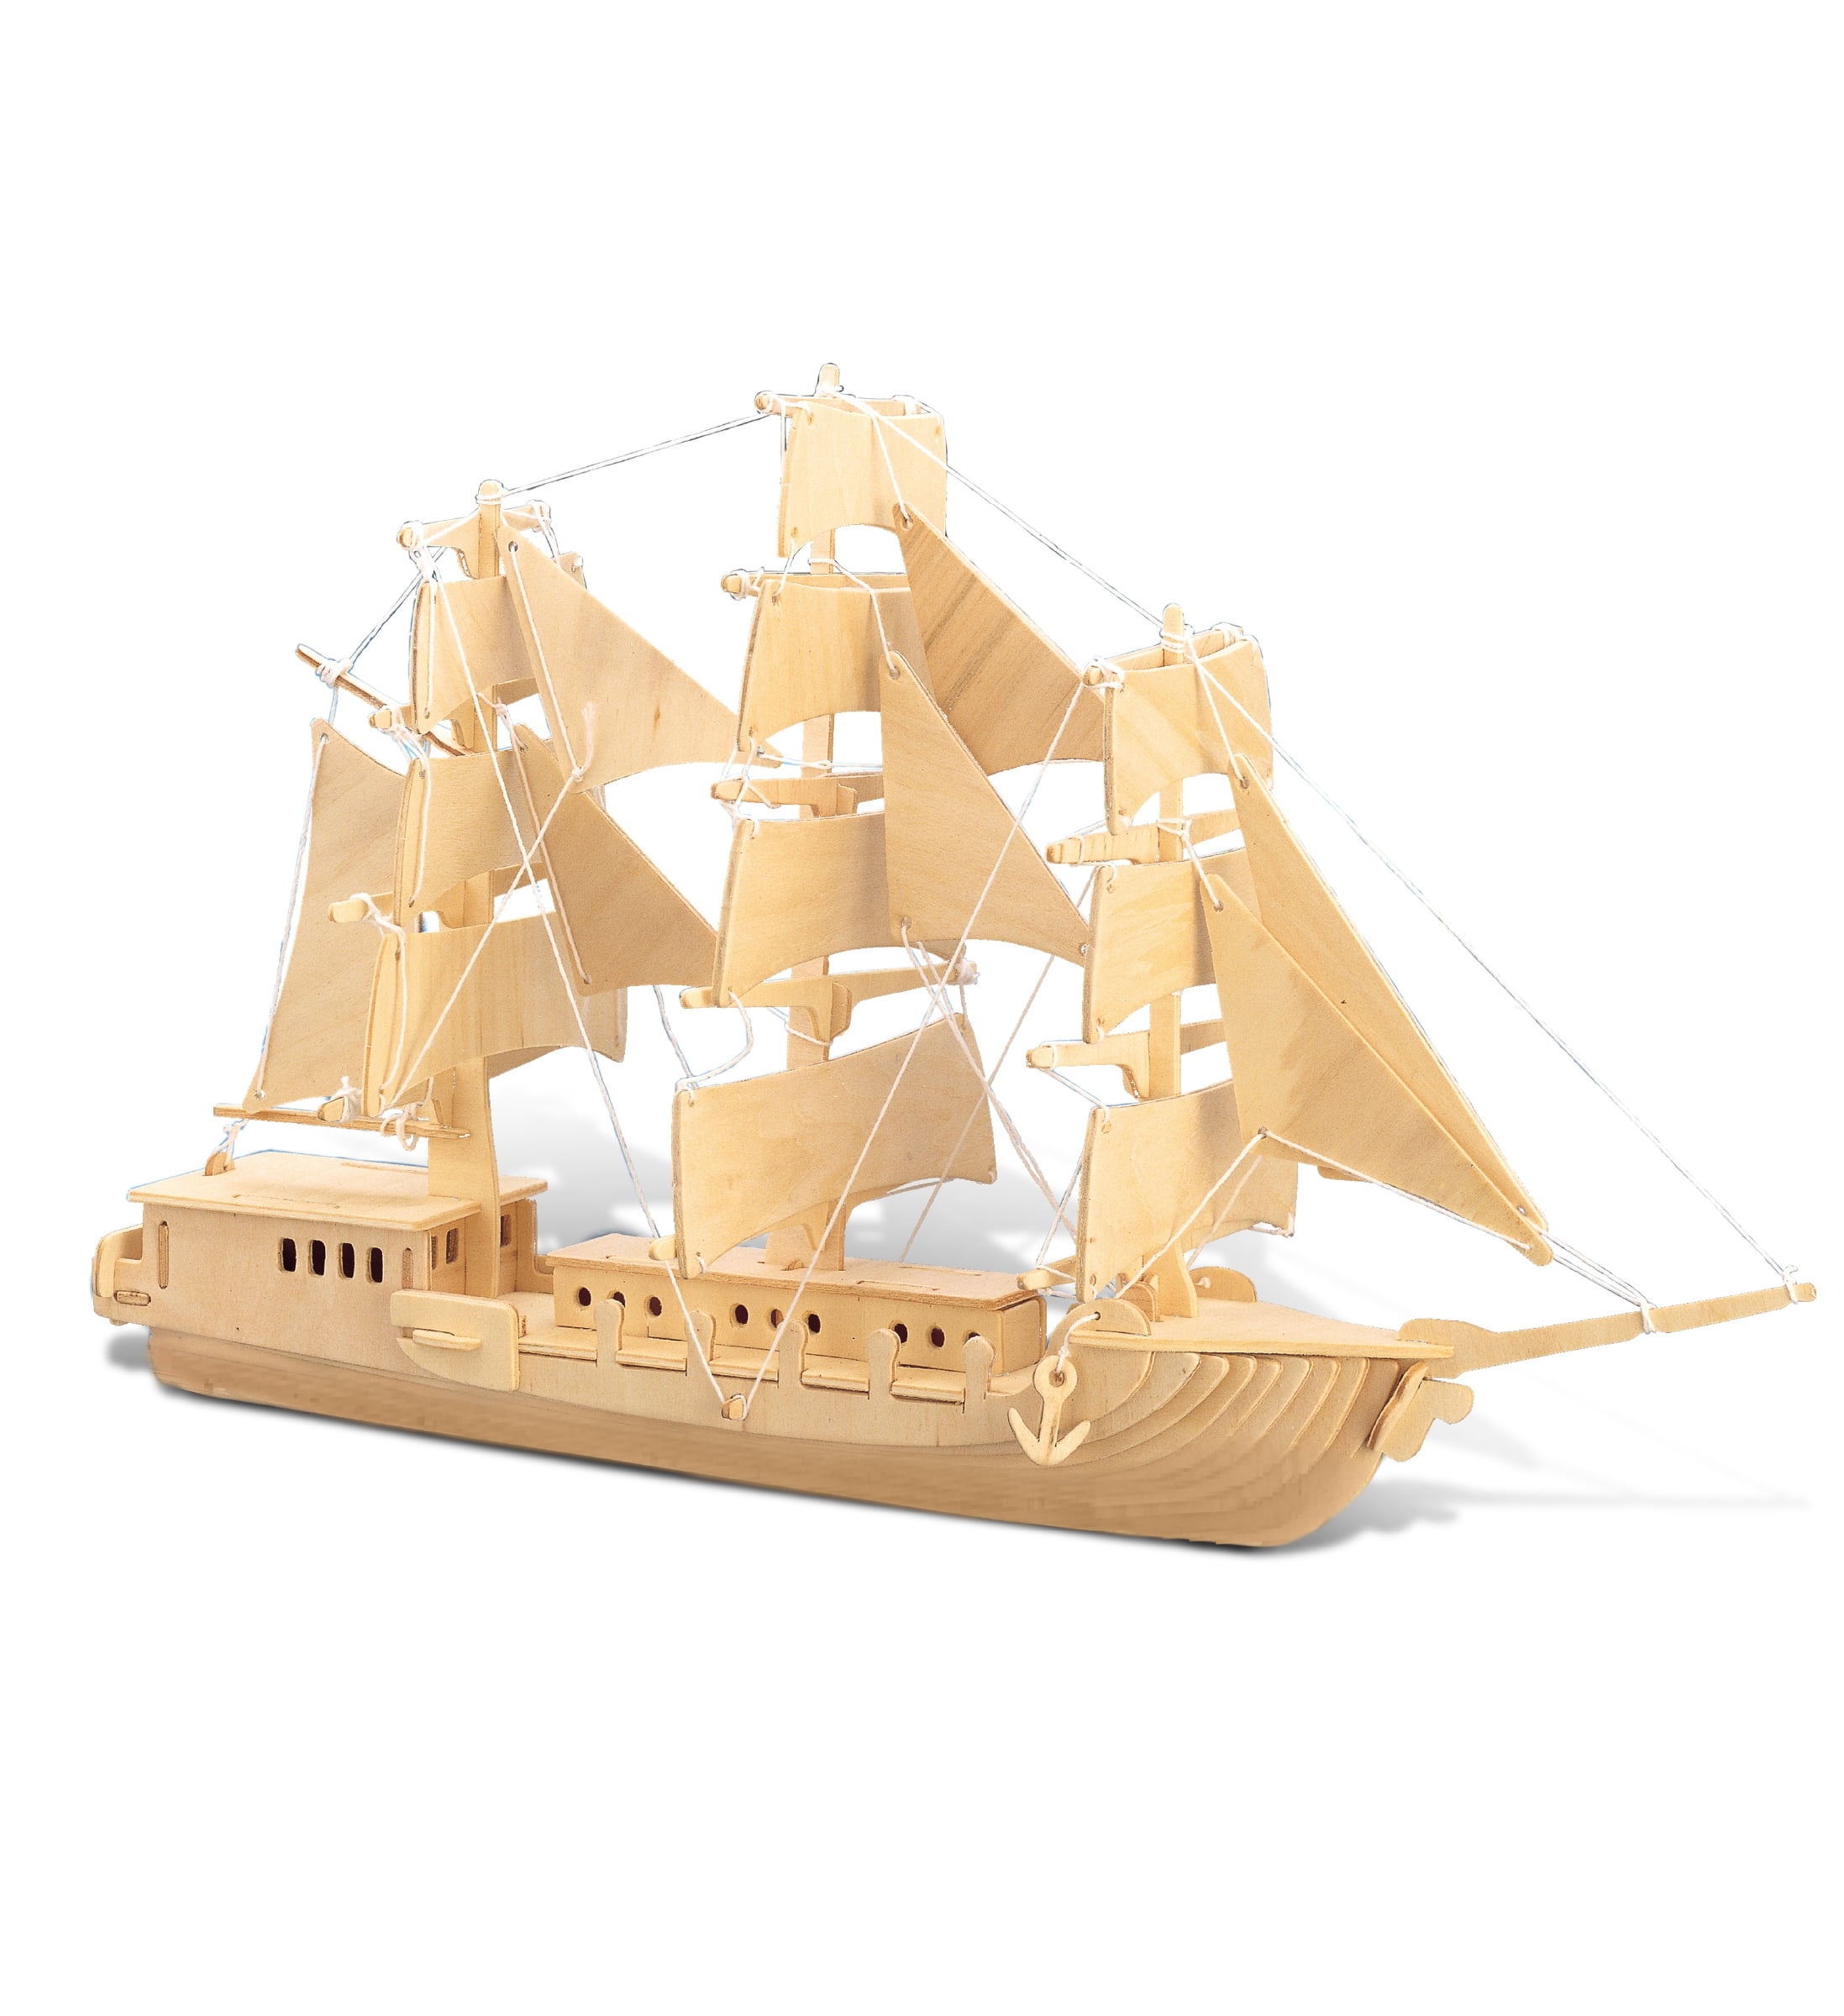 1:30 Ship Assembly Model Wooden Sailboat DIY Wooden Kit Puzzle Toys Gift DD 